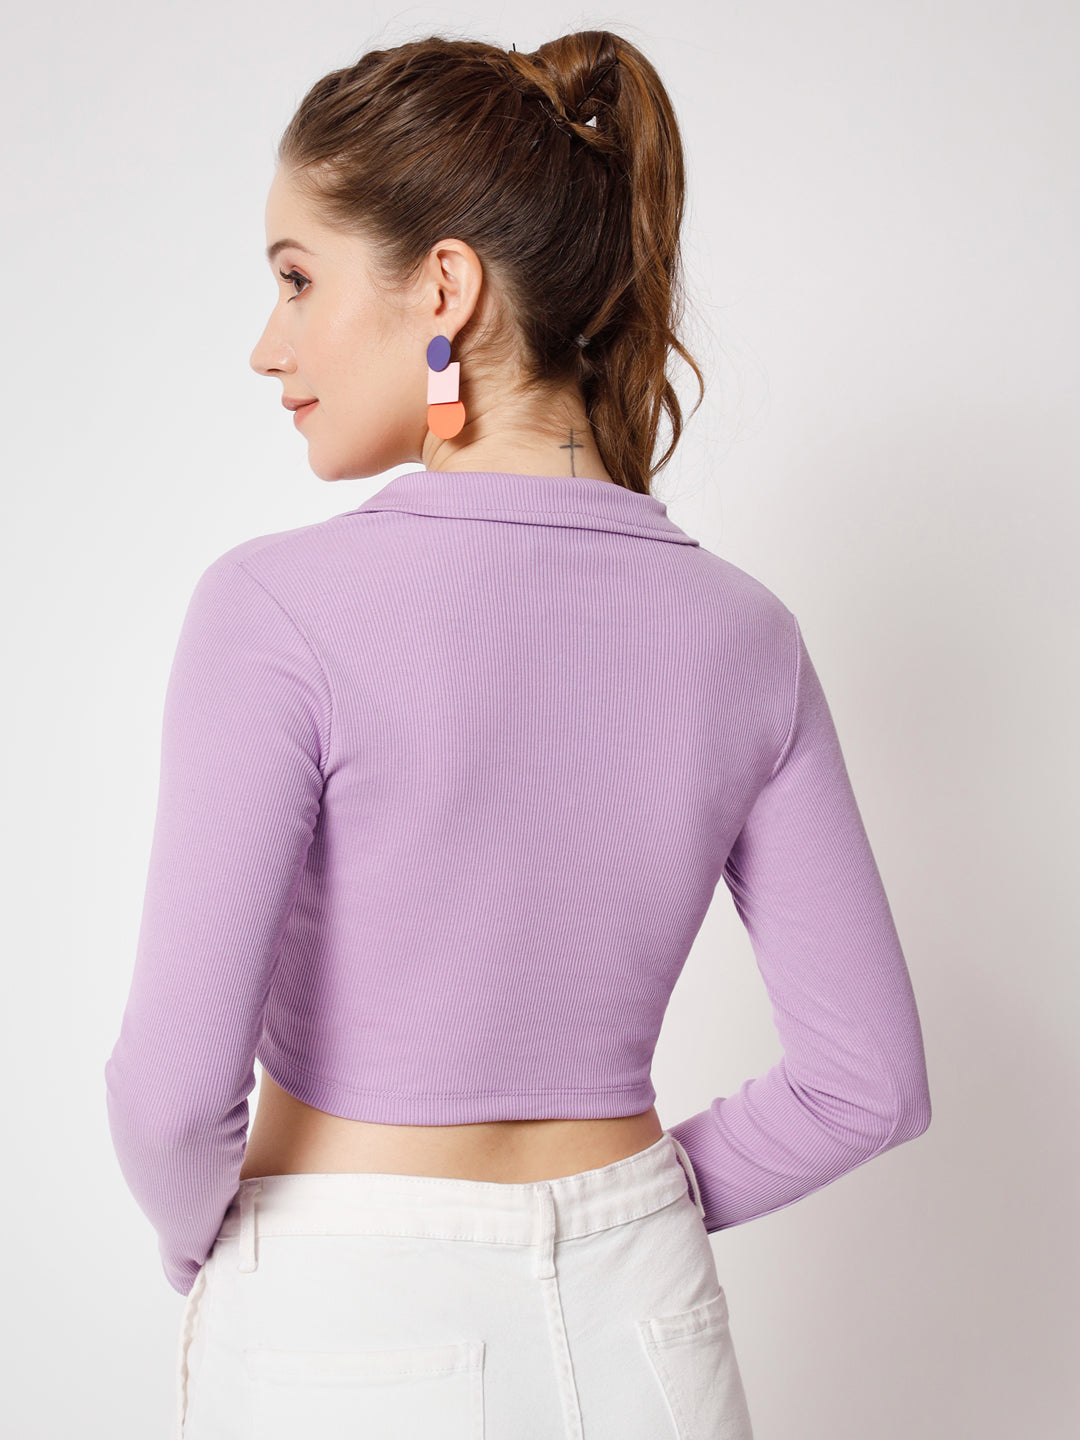 Lavender Collared Top